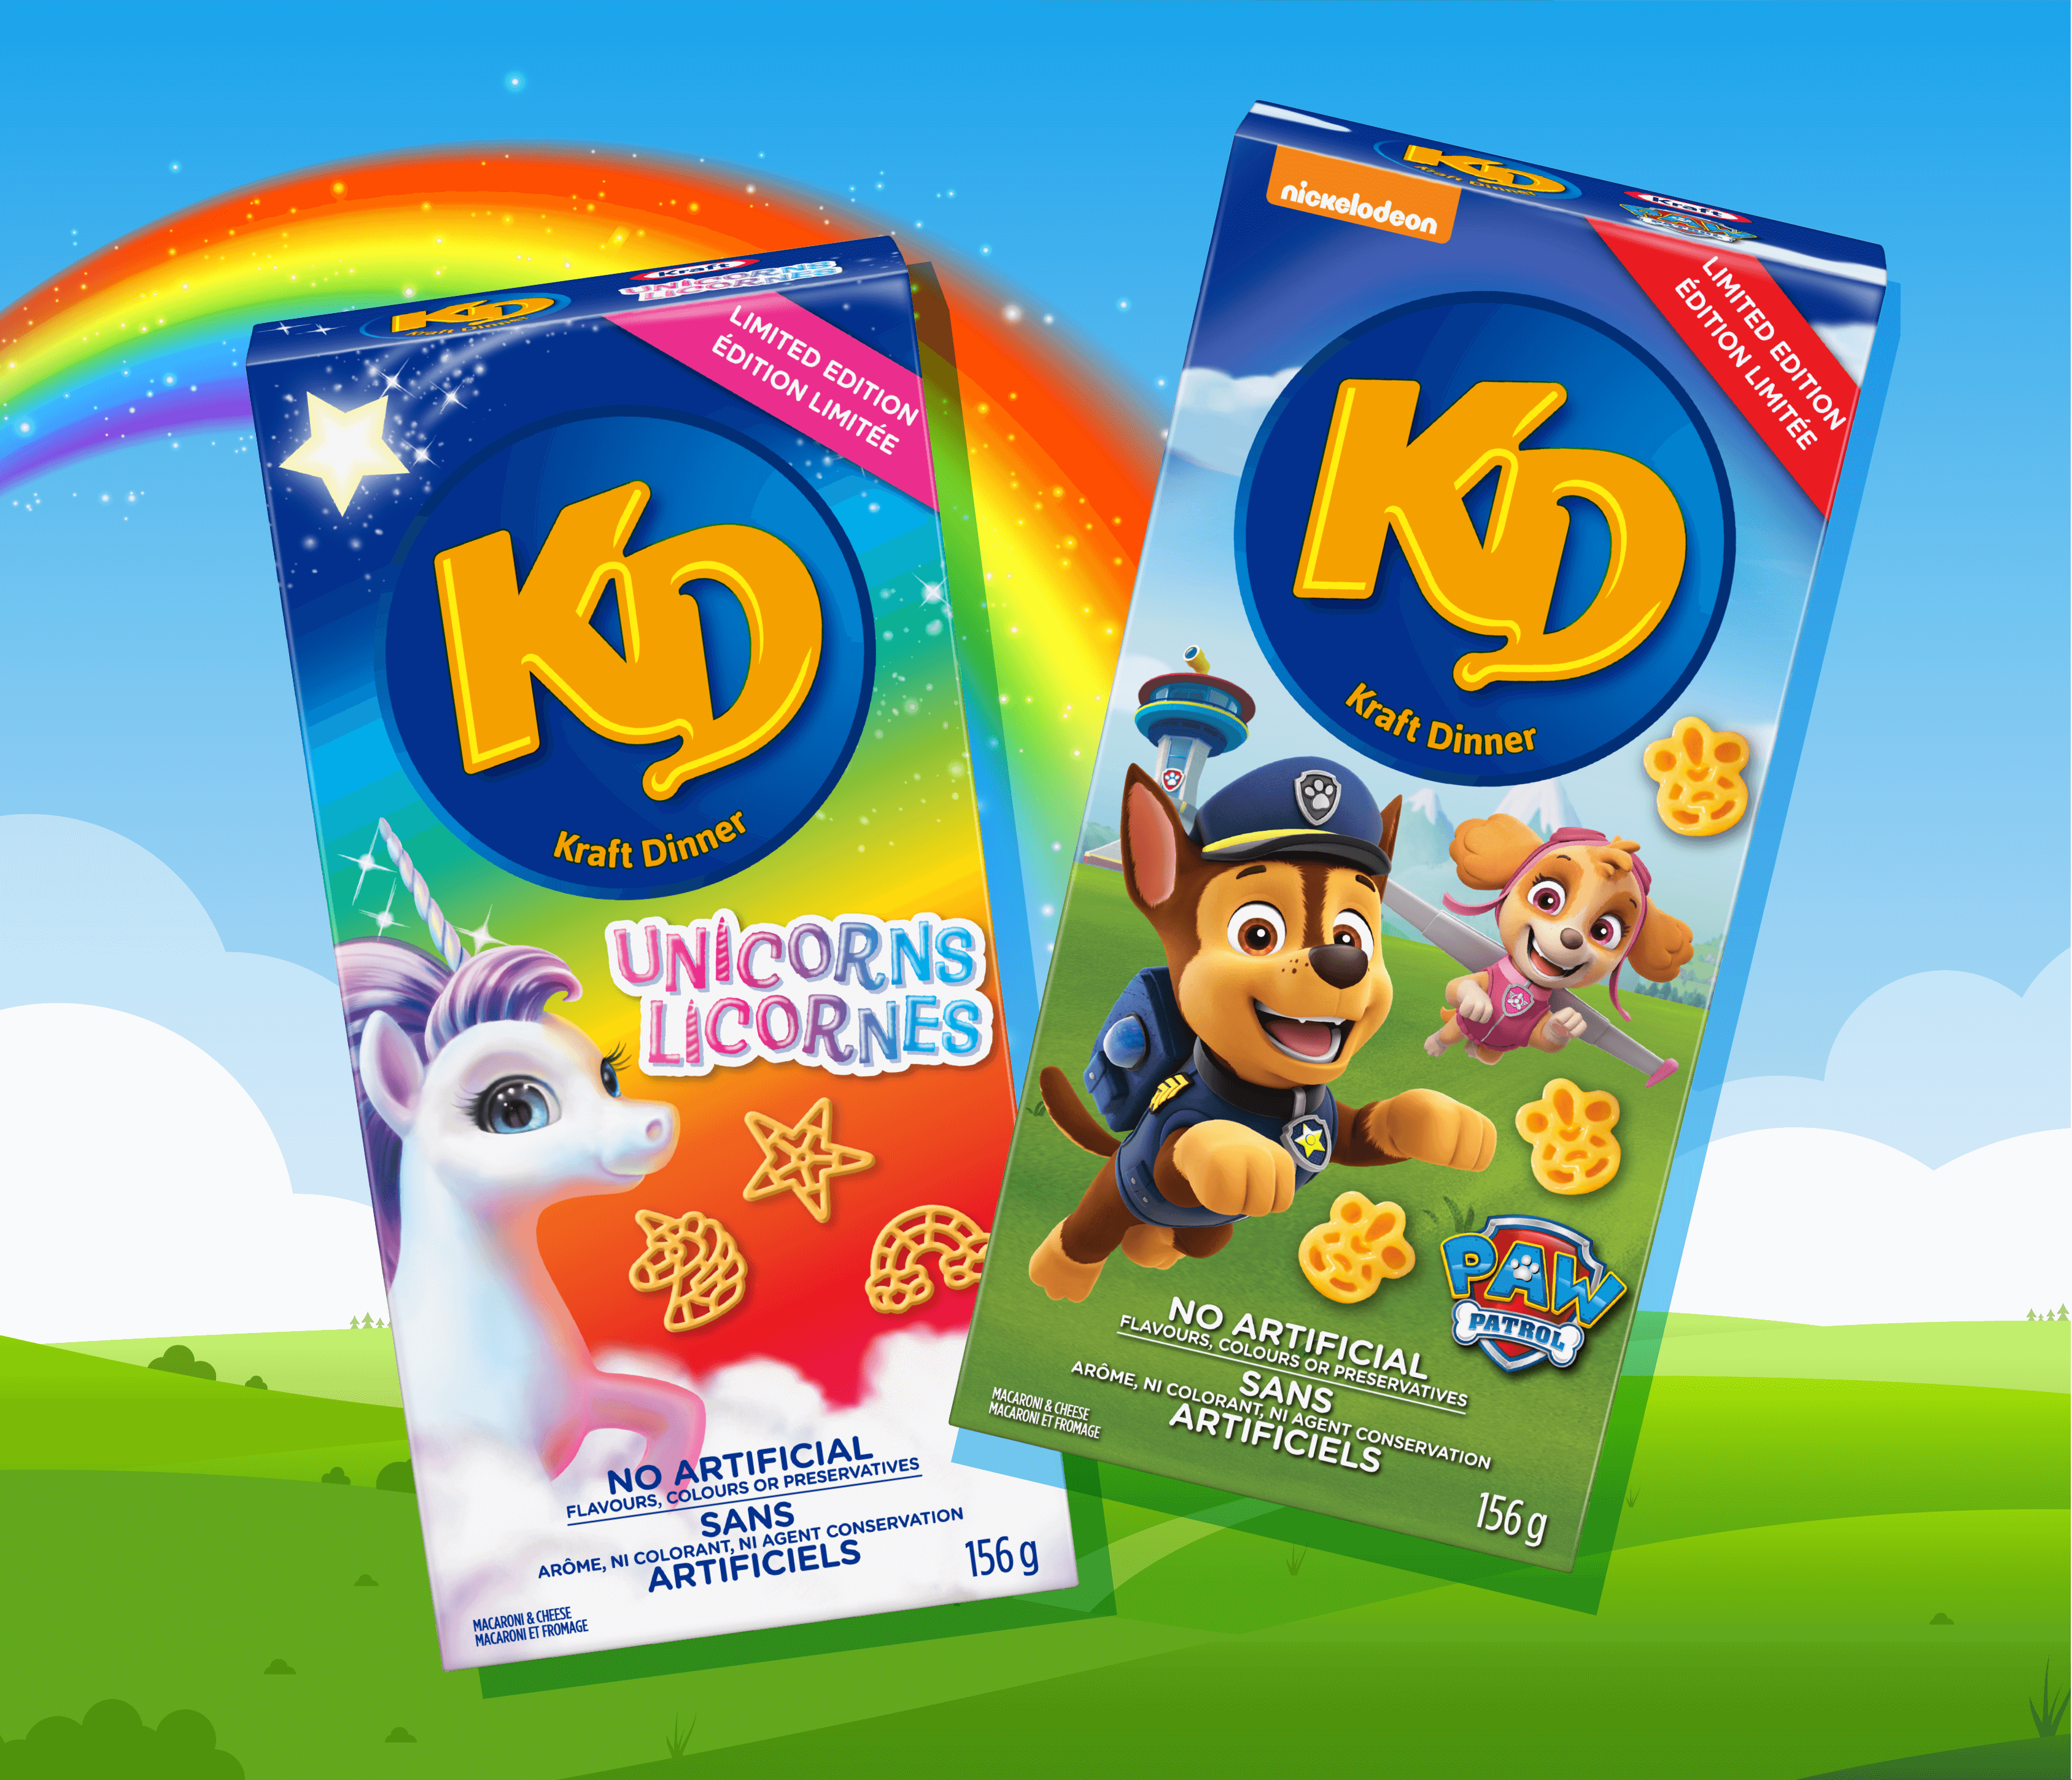 KD limited edition unicorn and paw patrol packaging